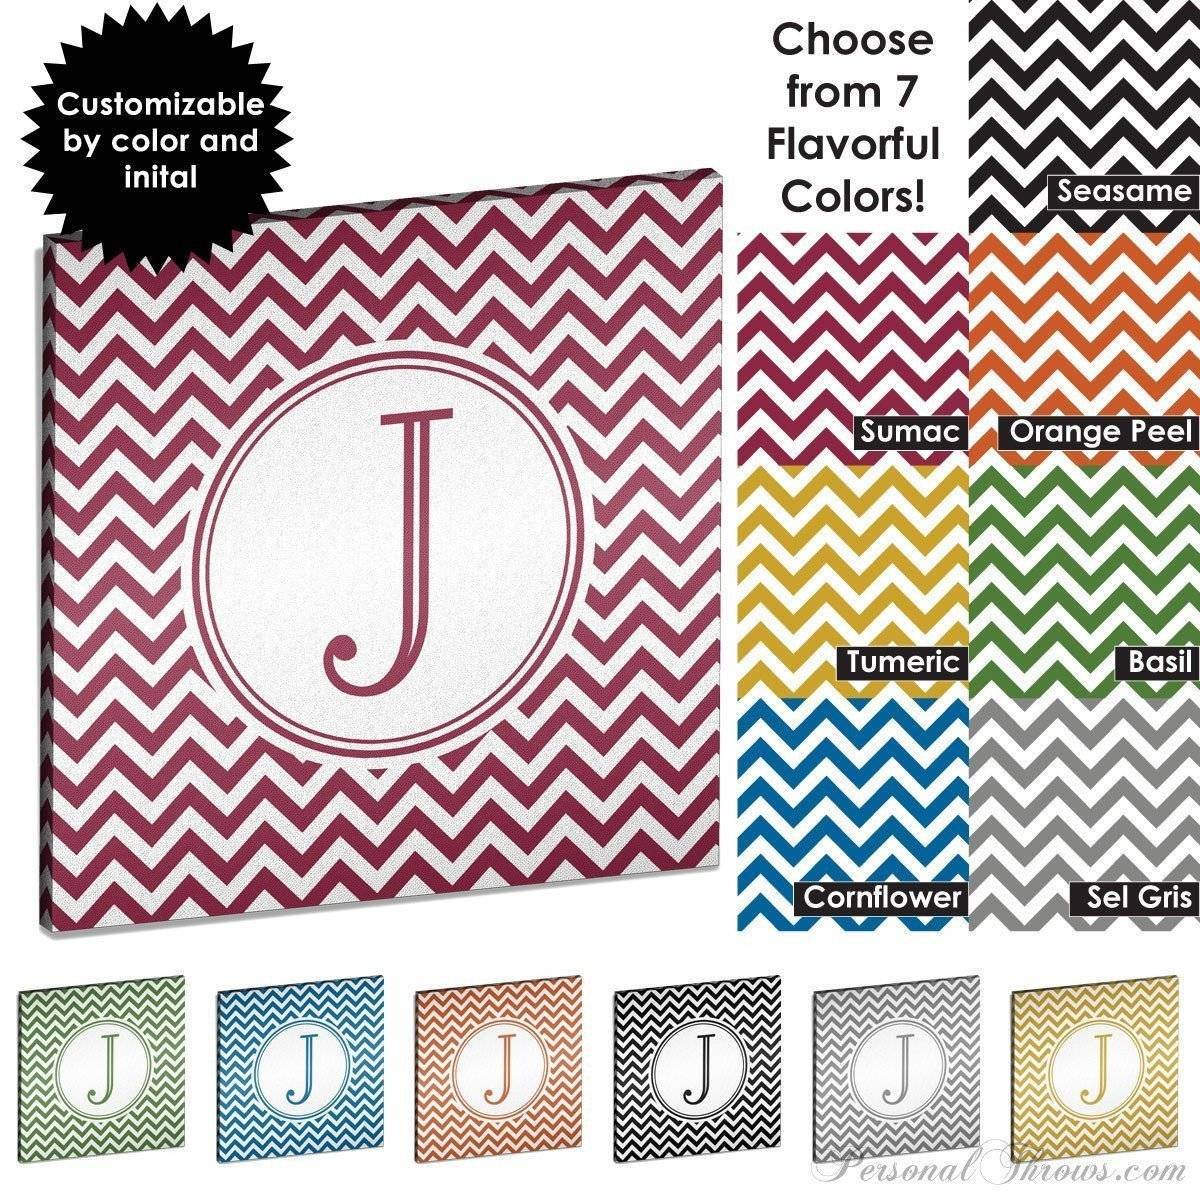 Monogrammed Gifts,Other Products - Chevron Monogrammed 16" X 16" Canvas Gallery Wrap